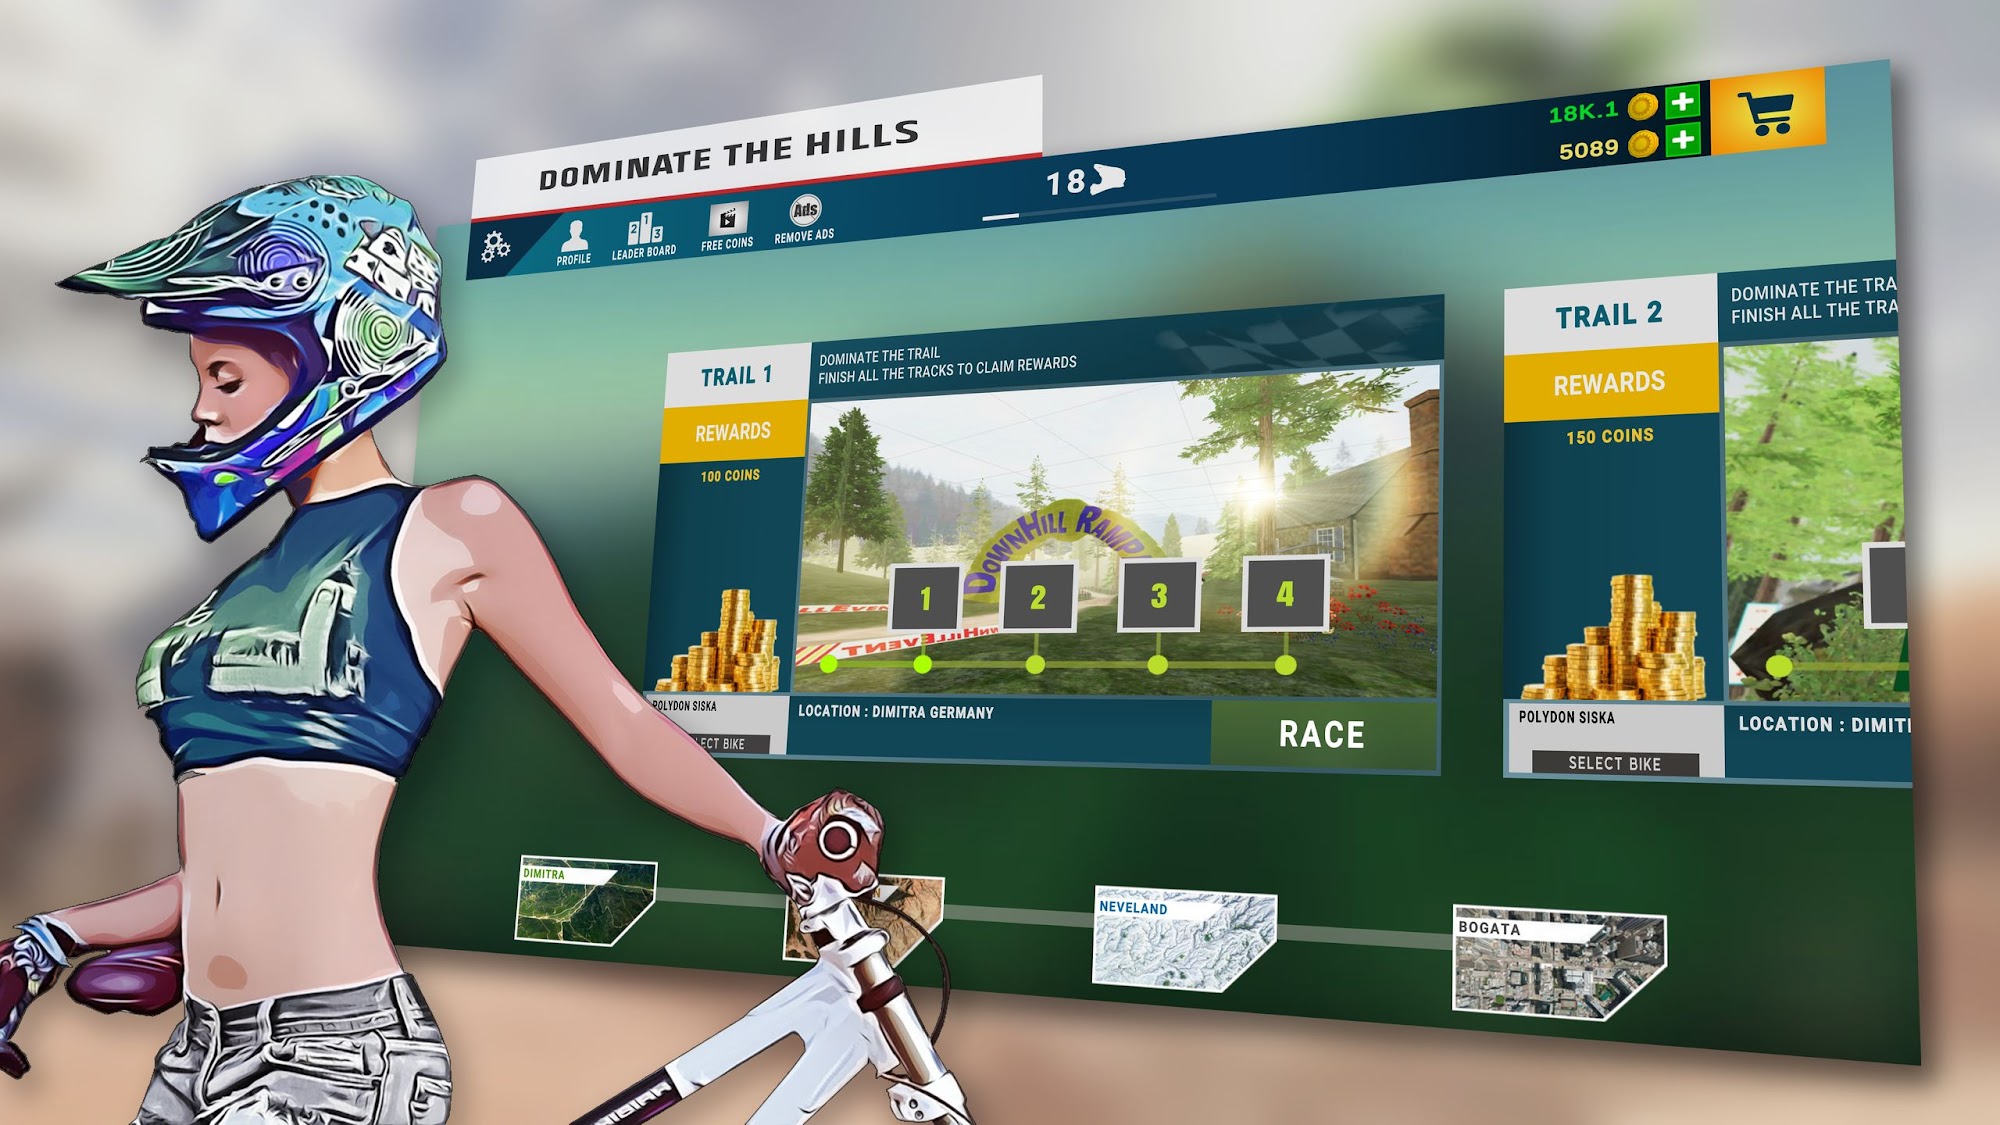 Downhill Republic for Android